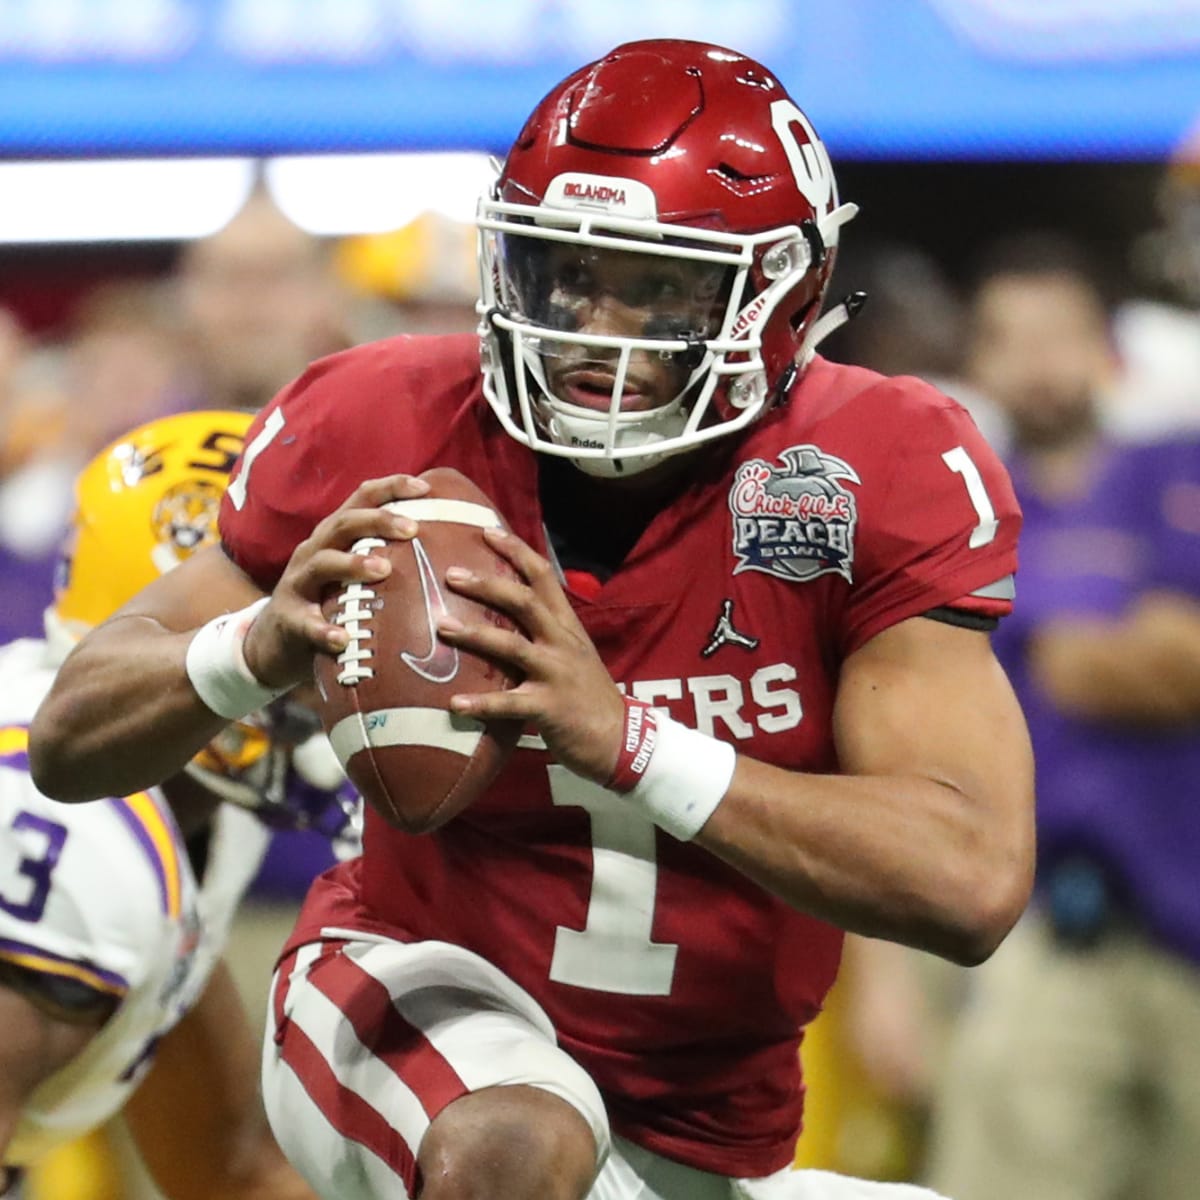 Oklahoma QB Jalen Hurts on new opportunity with Sooners: 'I'm kind of built  for these types of situations'